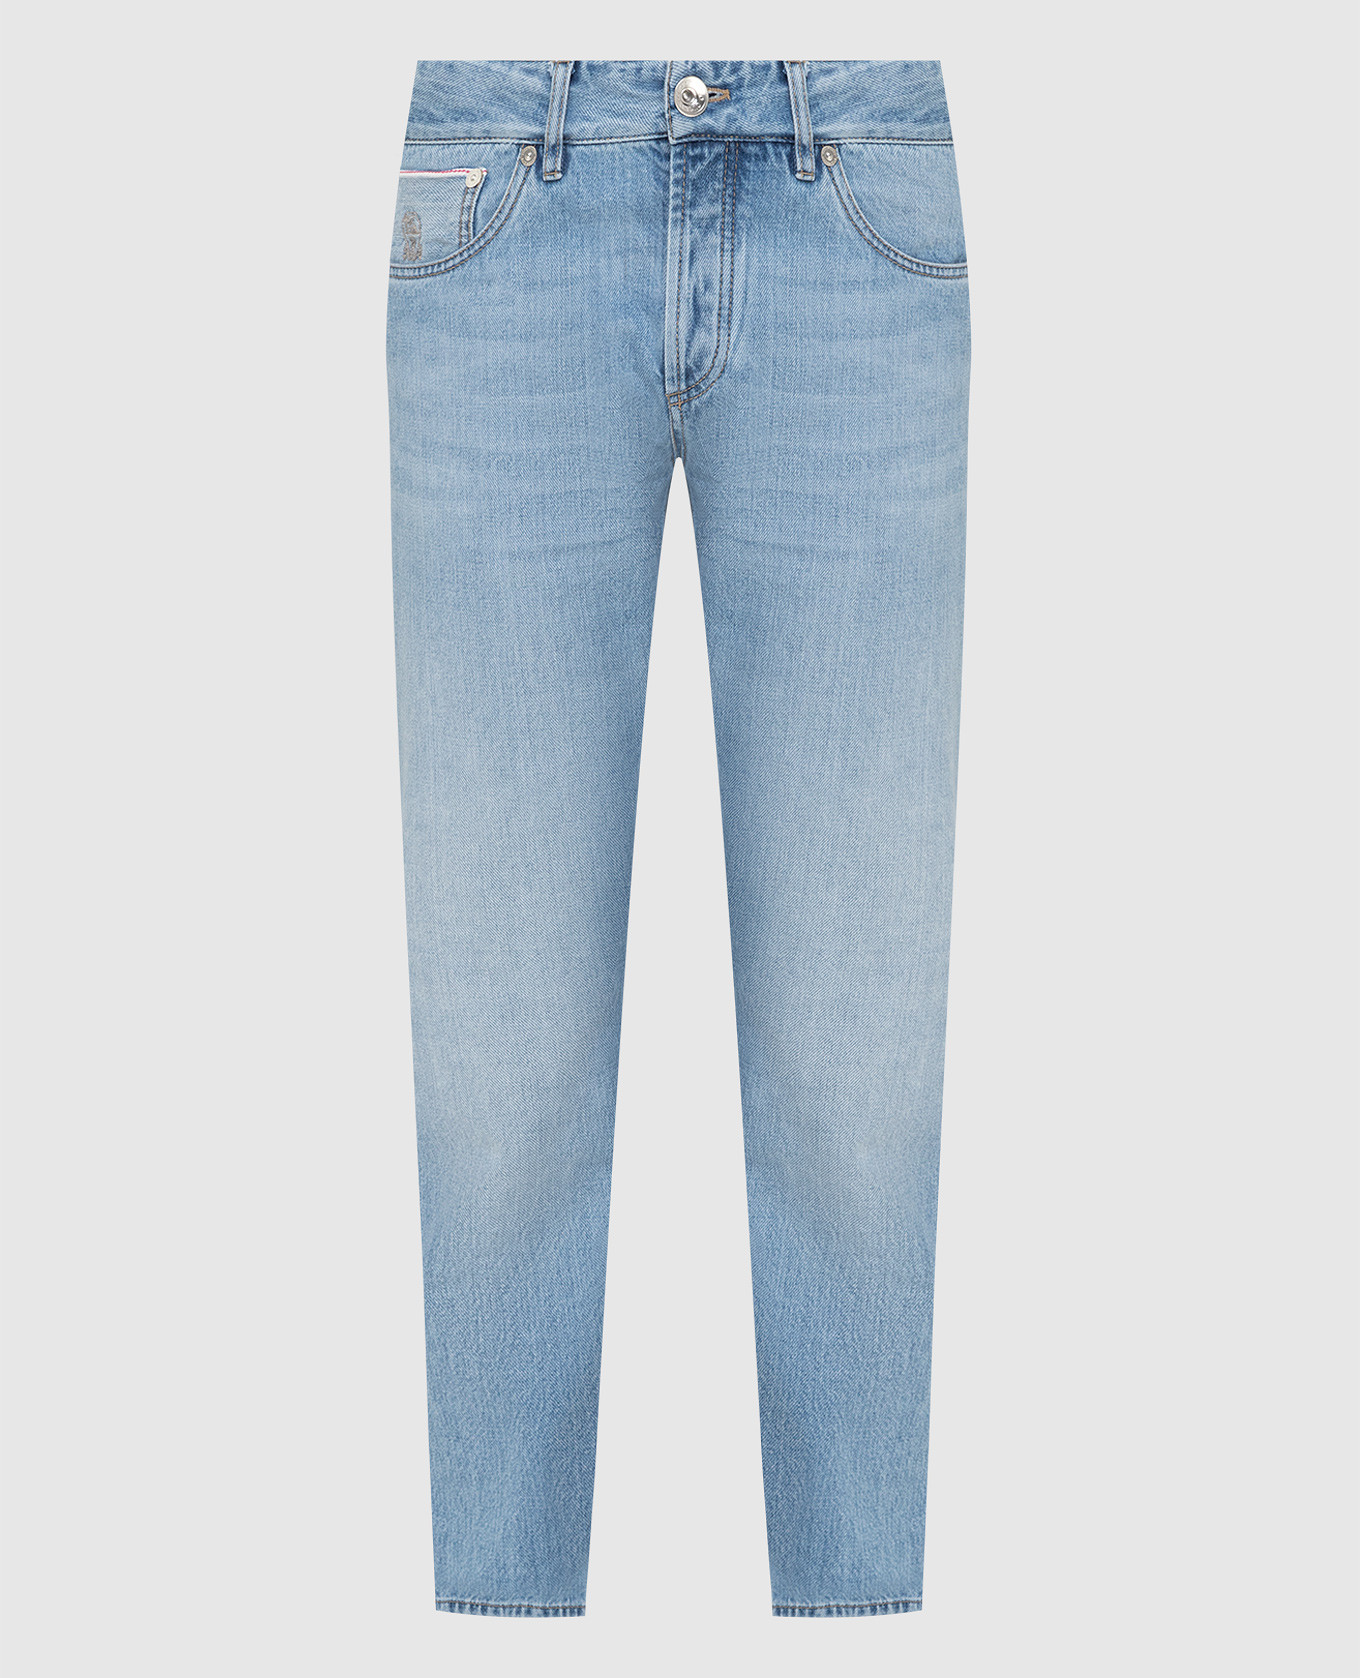 Washed effect jeans